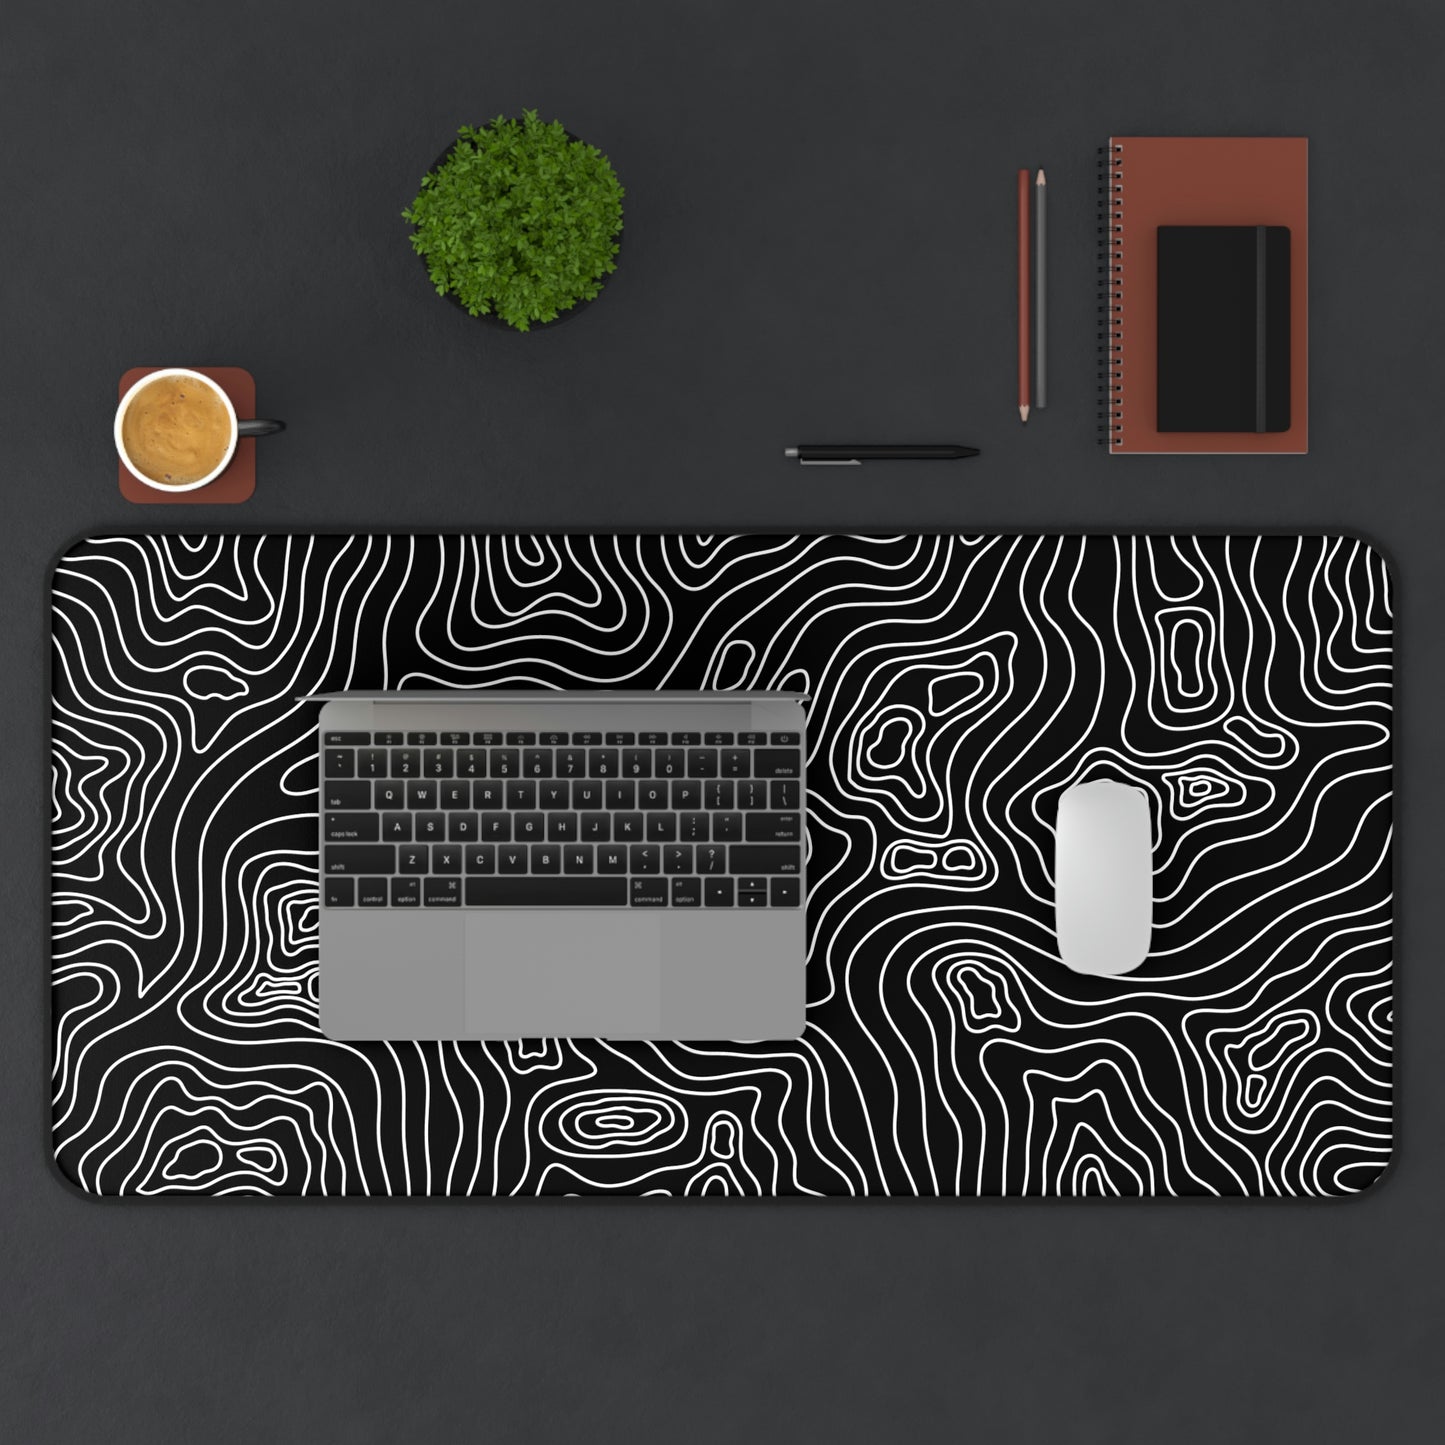 A 31" x 15.5" black desk mat with white topographic lines. A laptop and mouse sit on top of it.